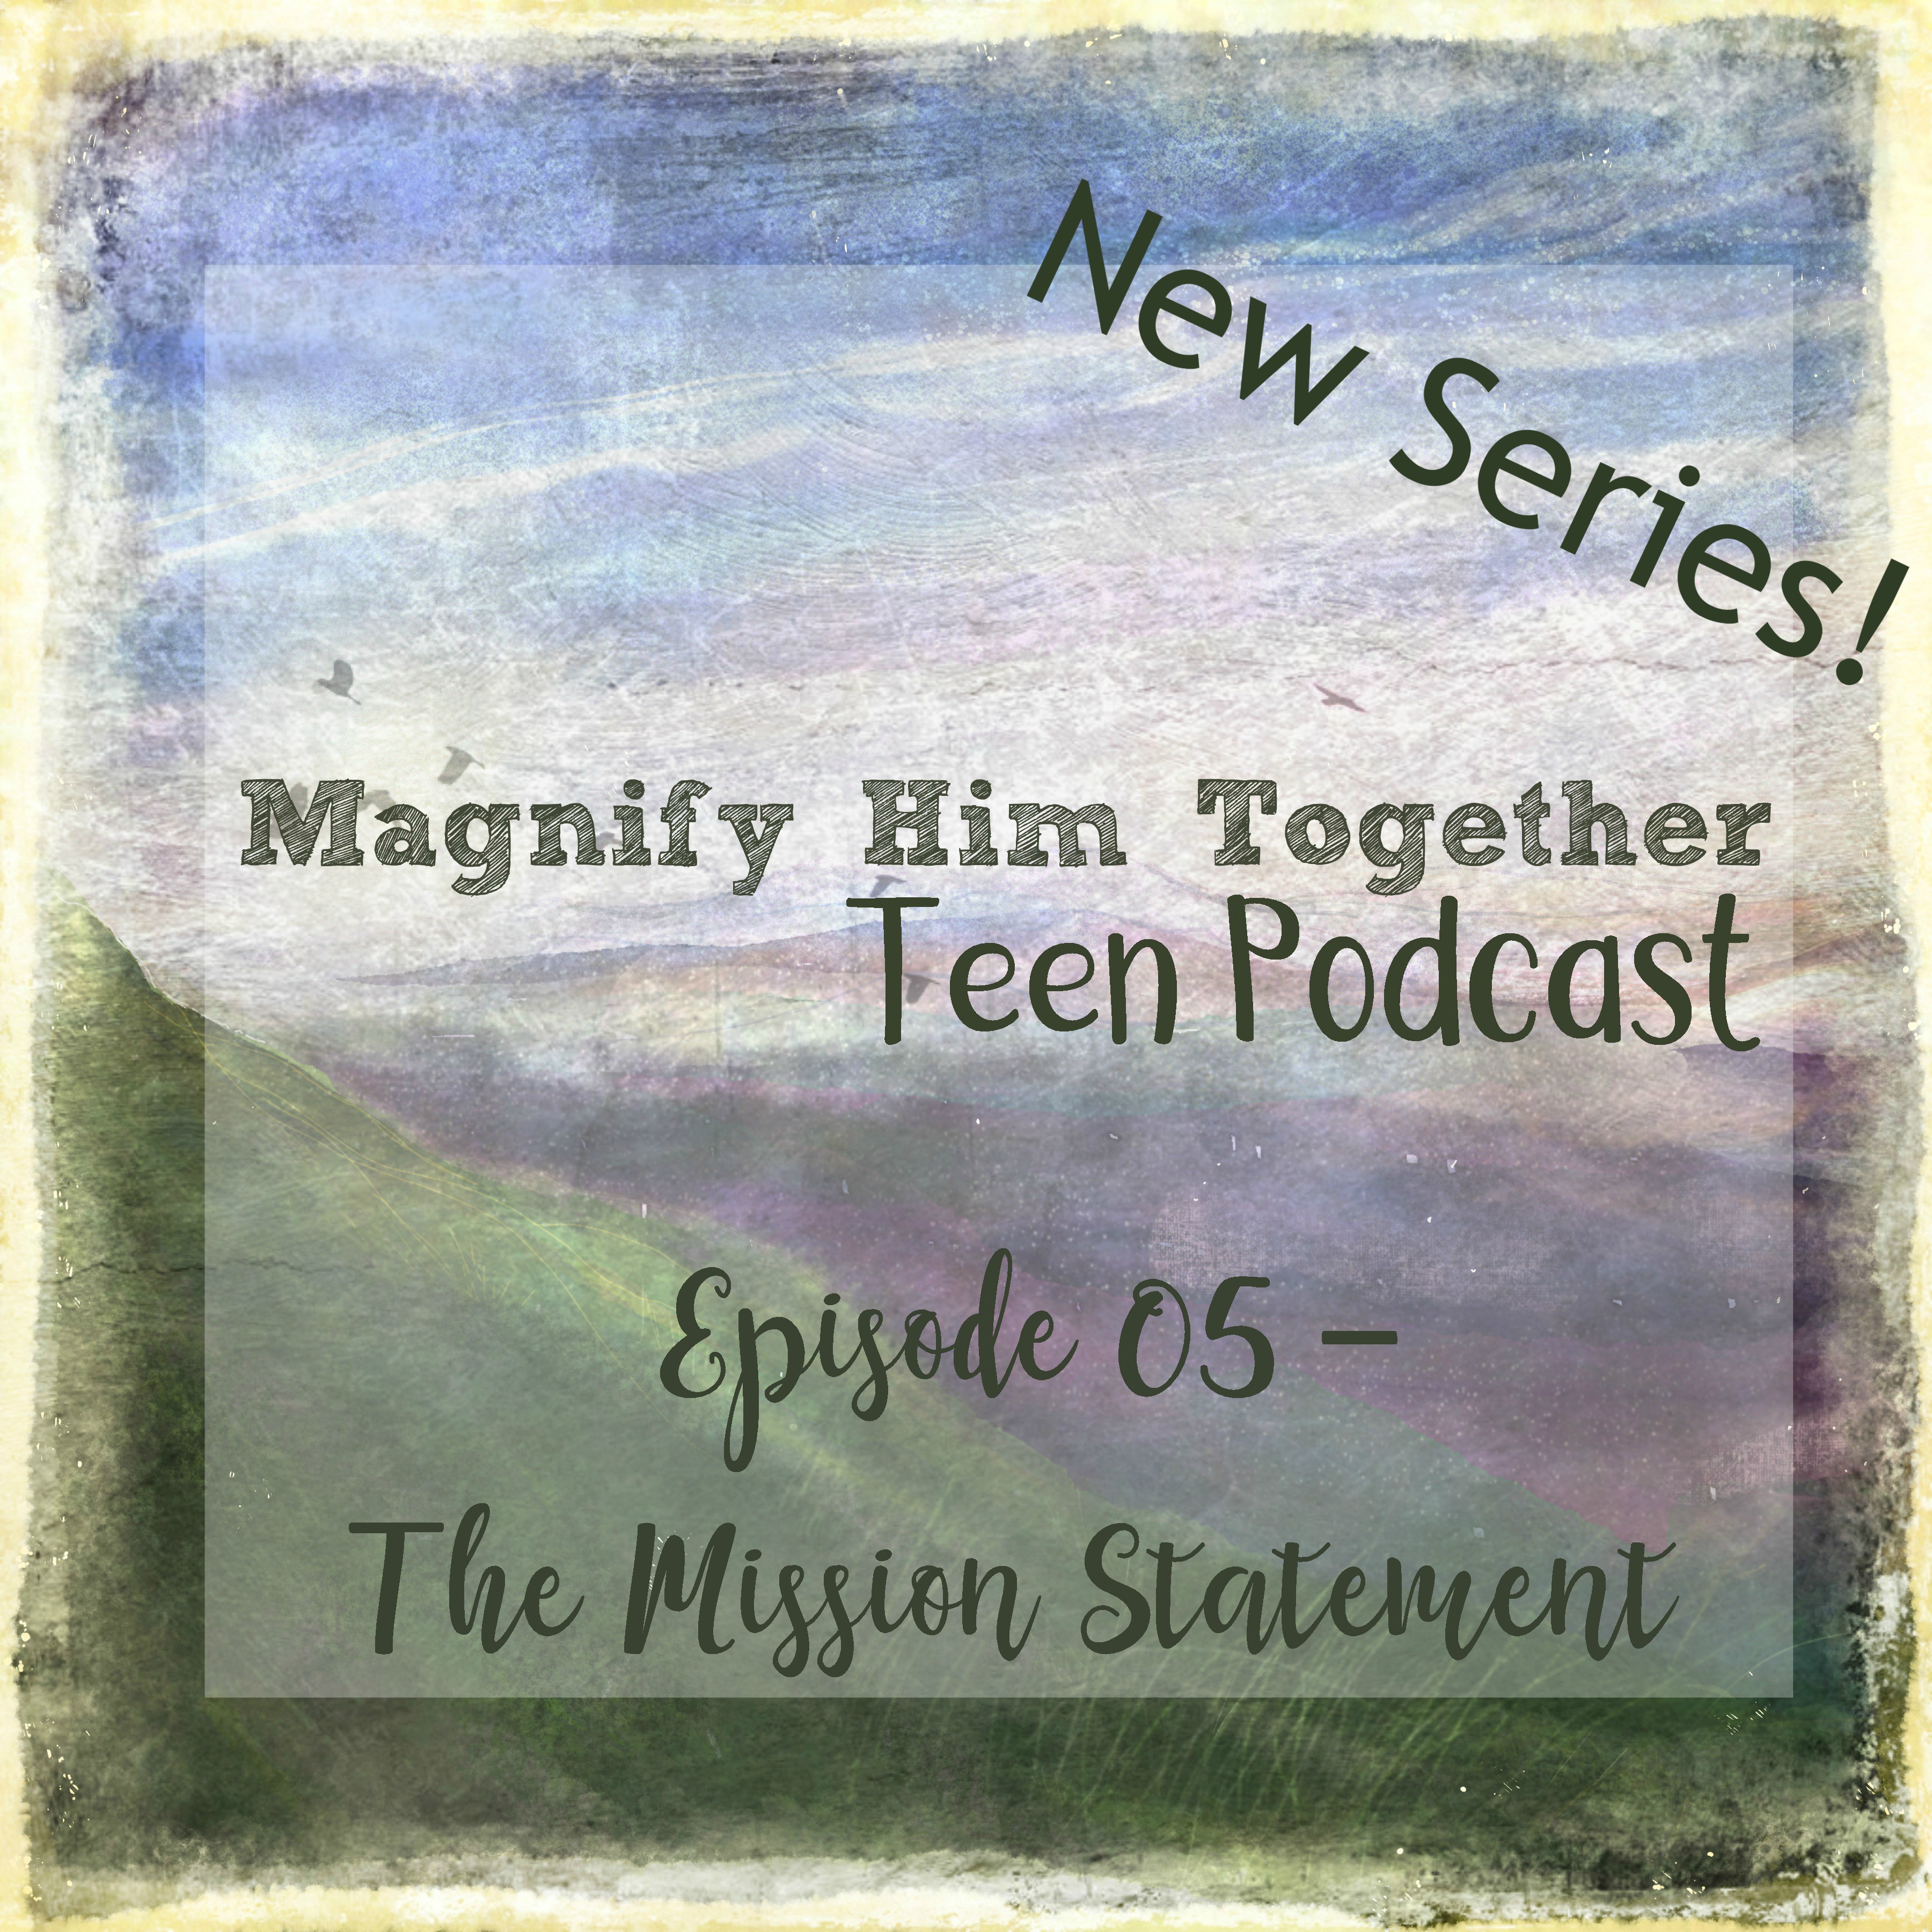 Teen Podcast Episode 05 The Mission Statement Magnify